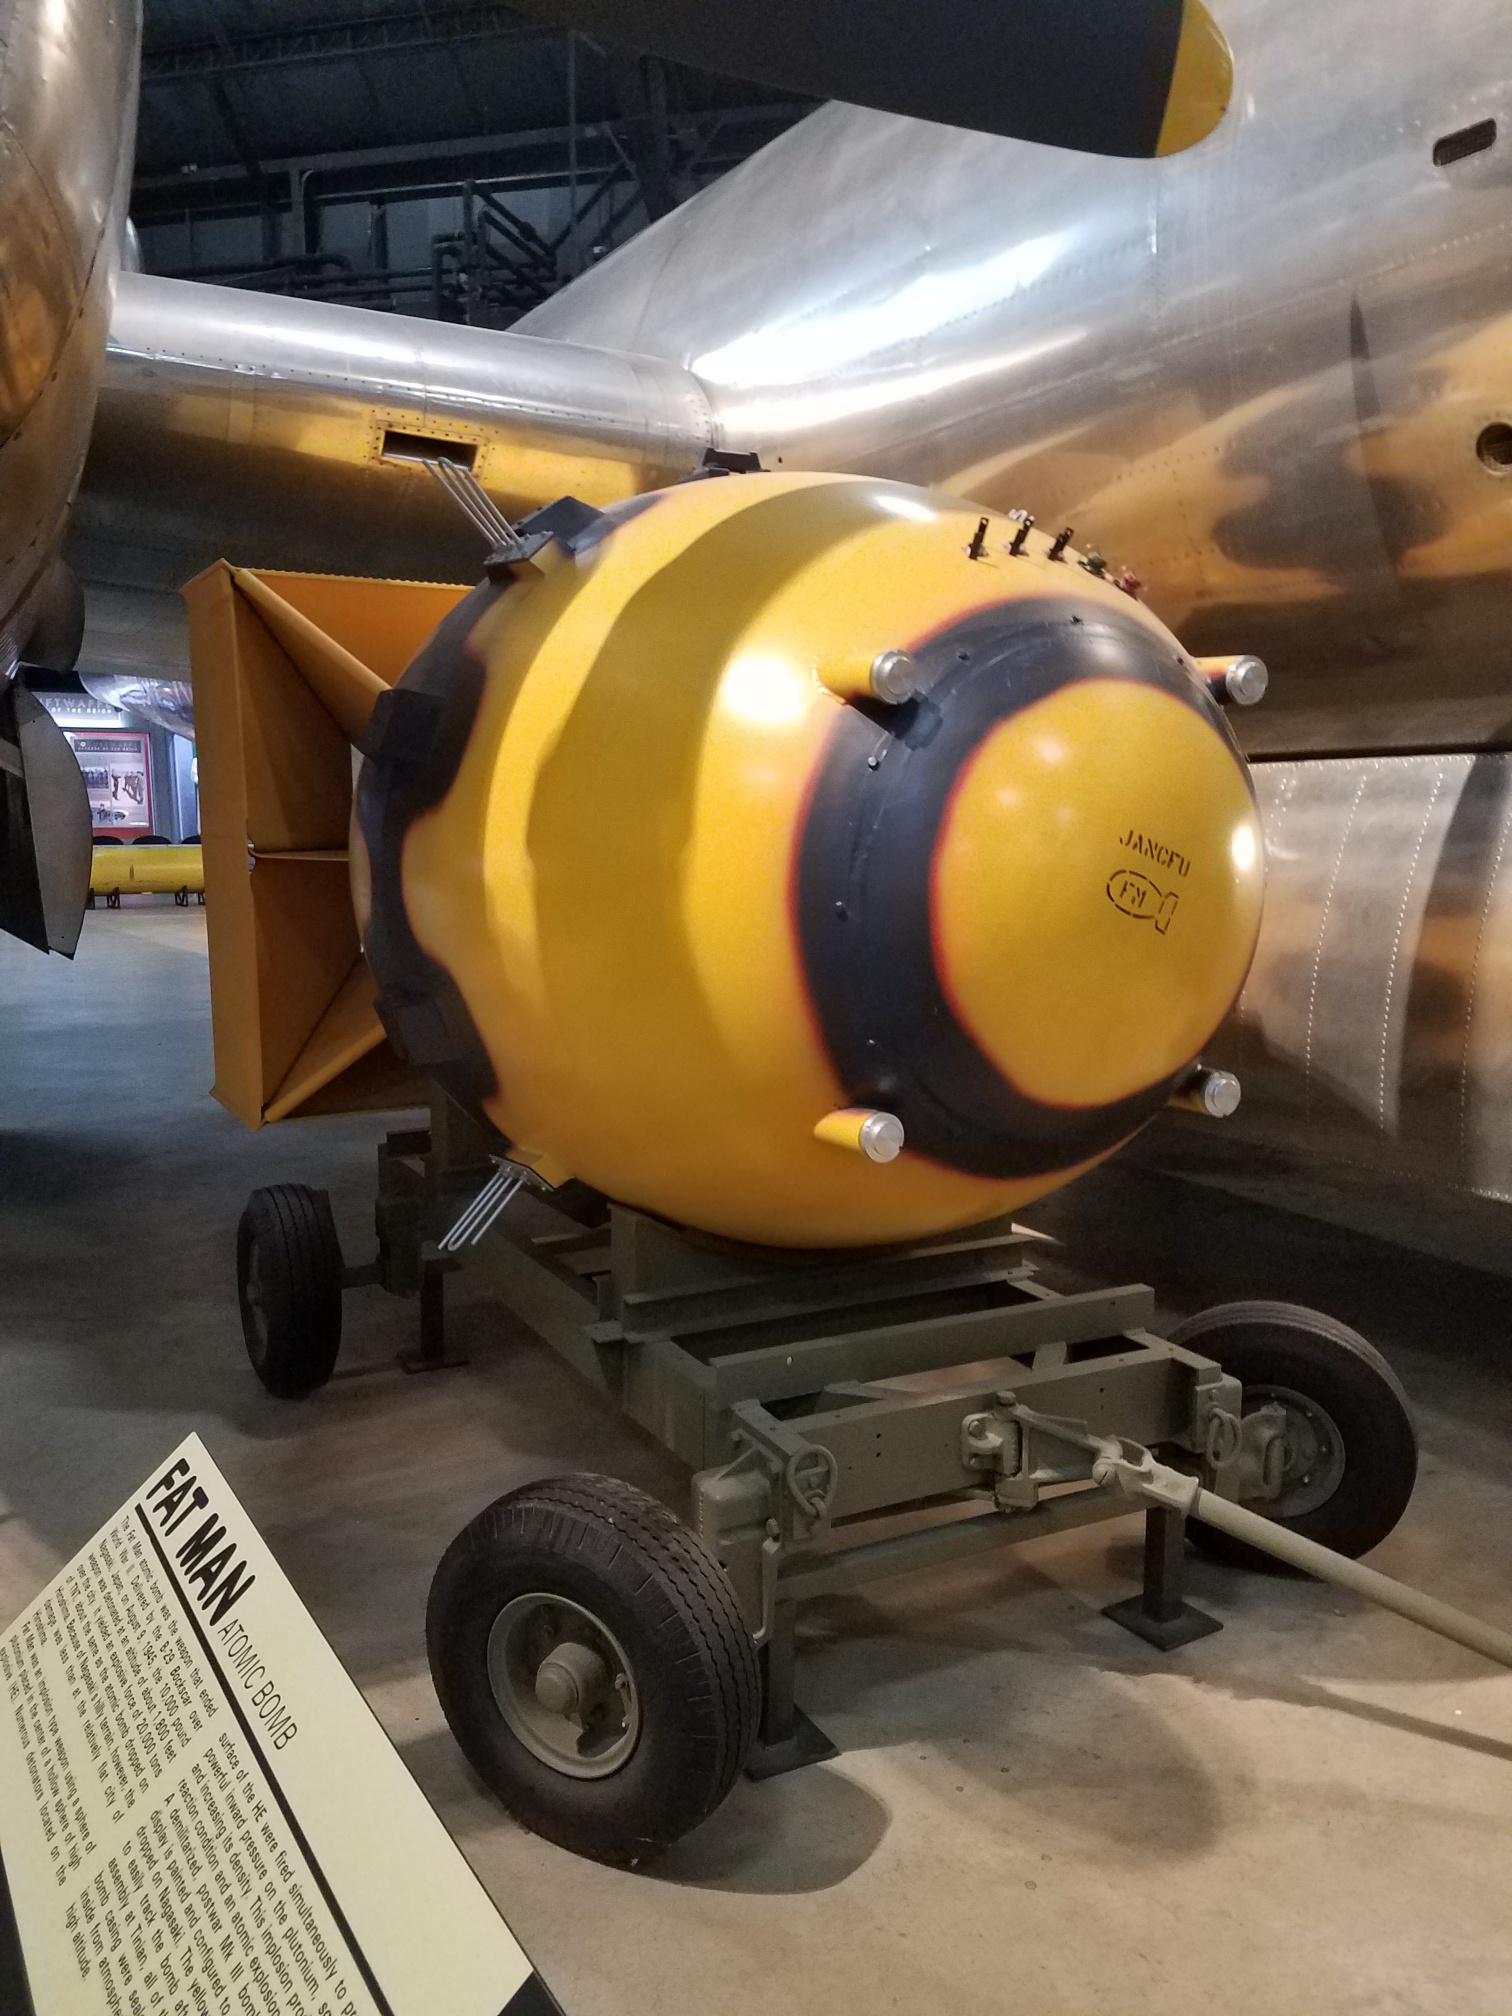 A replica of the atomic bomb dropped and detonated over the Japanese city of Nagasaki that ended WWII.